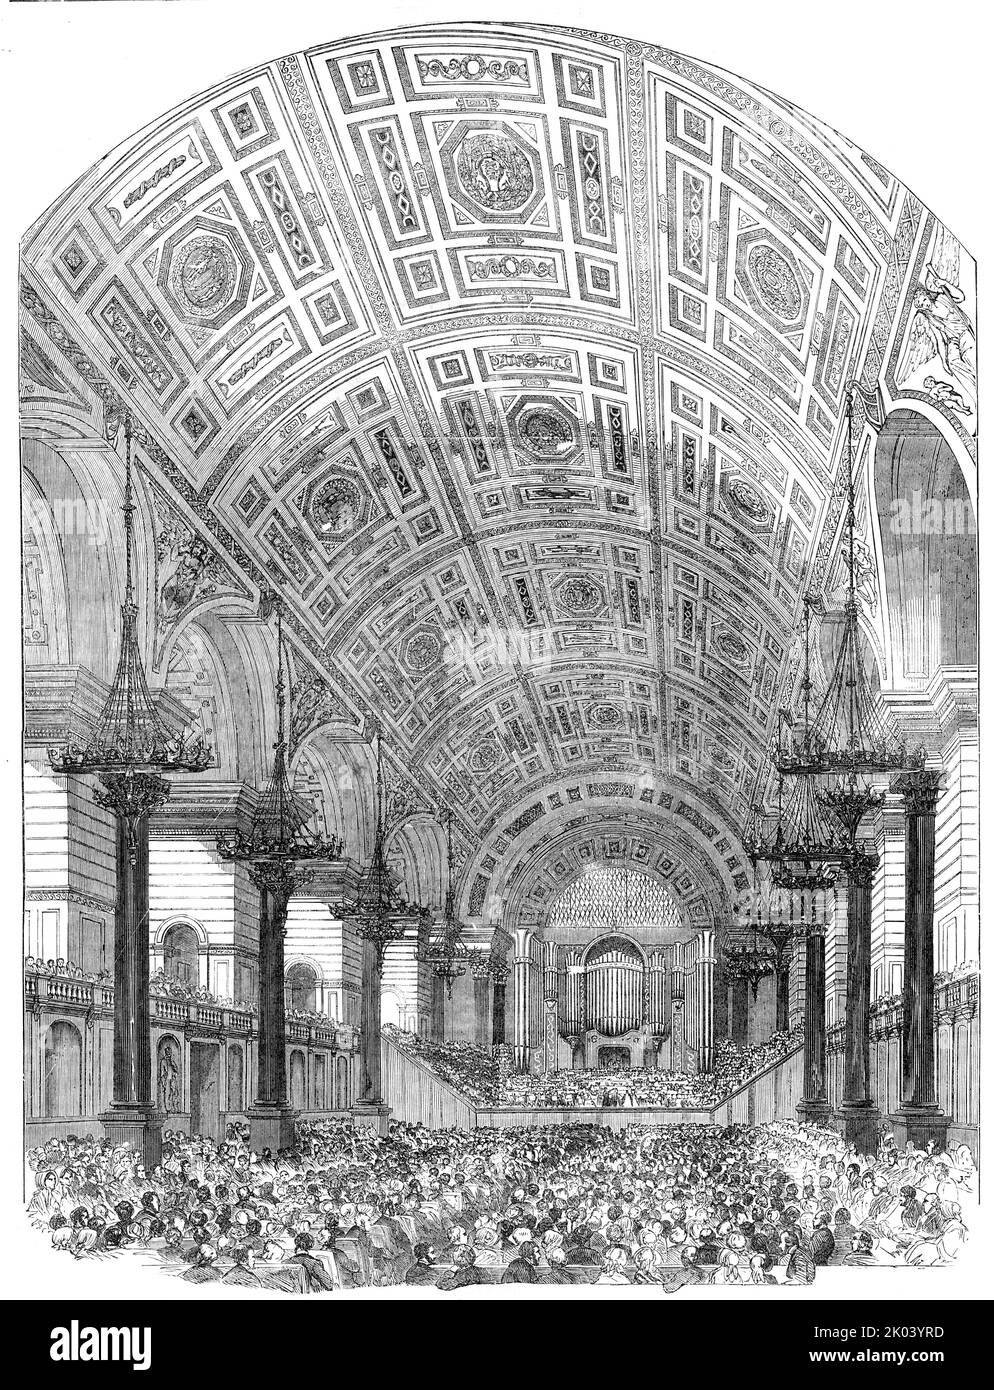 Interior of St. George's Hall, Liverpool, from the South - Performance of the First Oratorio, 1854. Inauguration of building designed by Harvey Lonsdale Elmes. 'The edifice contains not only the great hall for festivals and public assemblies, but, the courts of law, and various apartments for municipal and other purposes. The great hall is 168 feet long, 100 feet wide, and 85 feet high. The ceiling is a semicircular arch...extending over the whole length of the hall. Galleries run along the two east and west sides; and, along both the length and breadth of the hall, there is a range of noble C Stock Photo